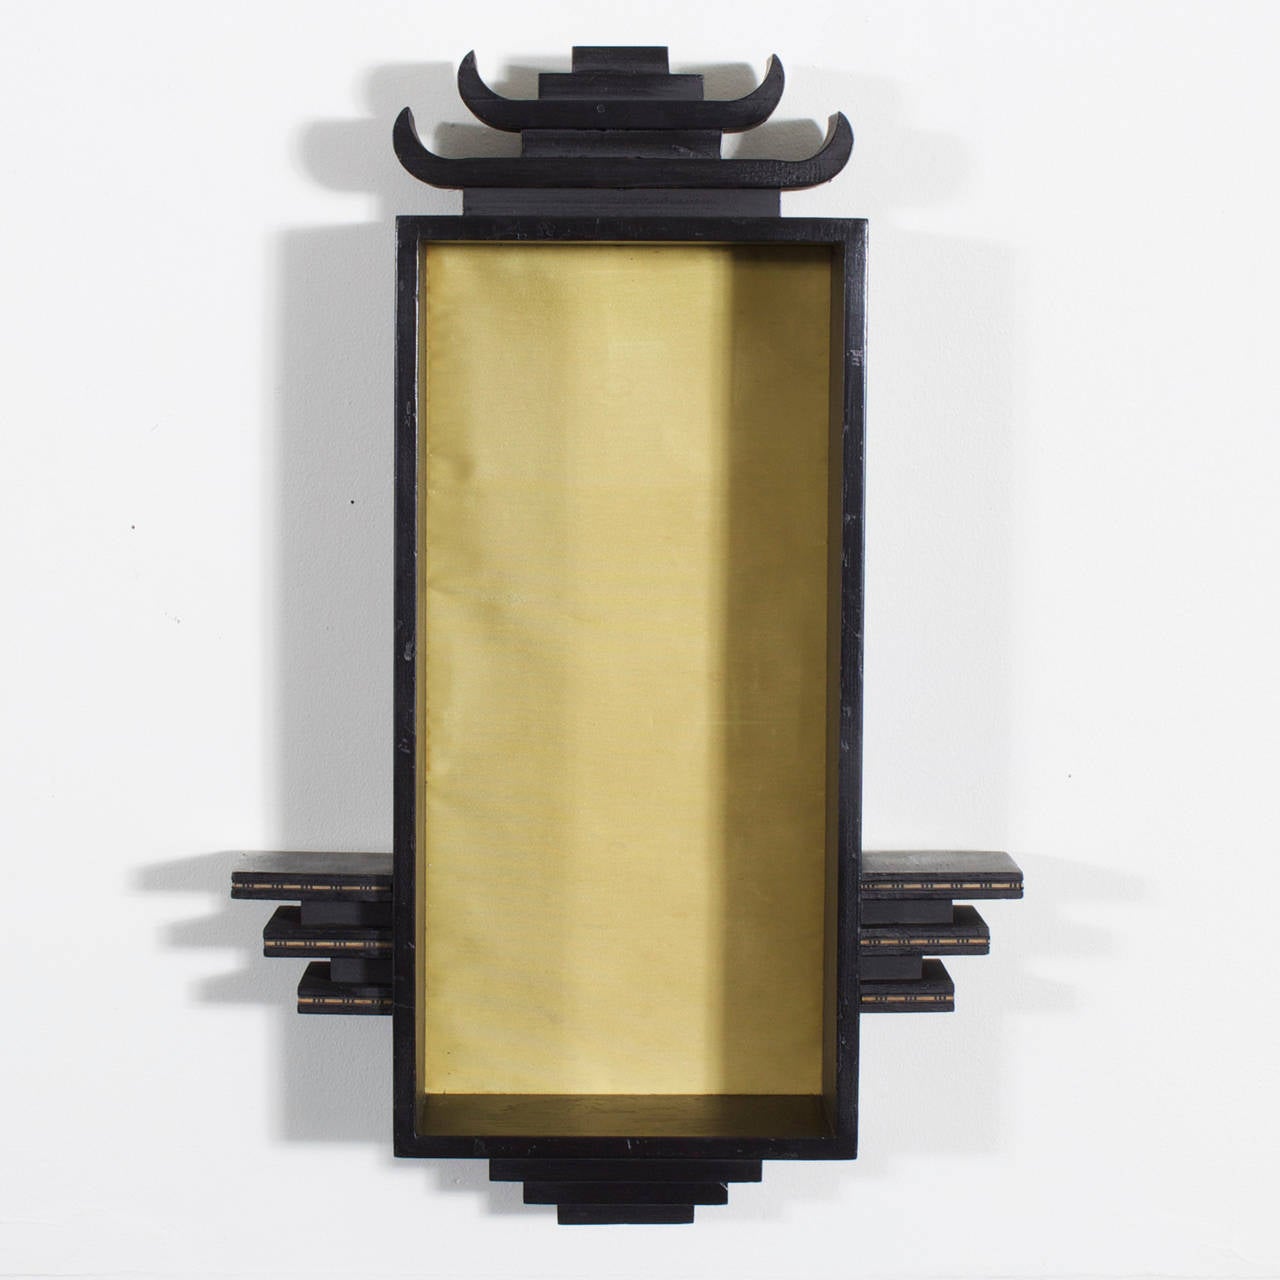 A pair of Mid-Century James Mont style Asian Modern ebonized wood wall brackets with pagoda tops and yellow silk back panels for a hint of color. A modern take on a chinoiserie style. Perfect for displaying your treasured objects in a dramatic way.